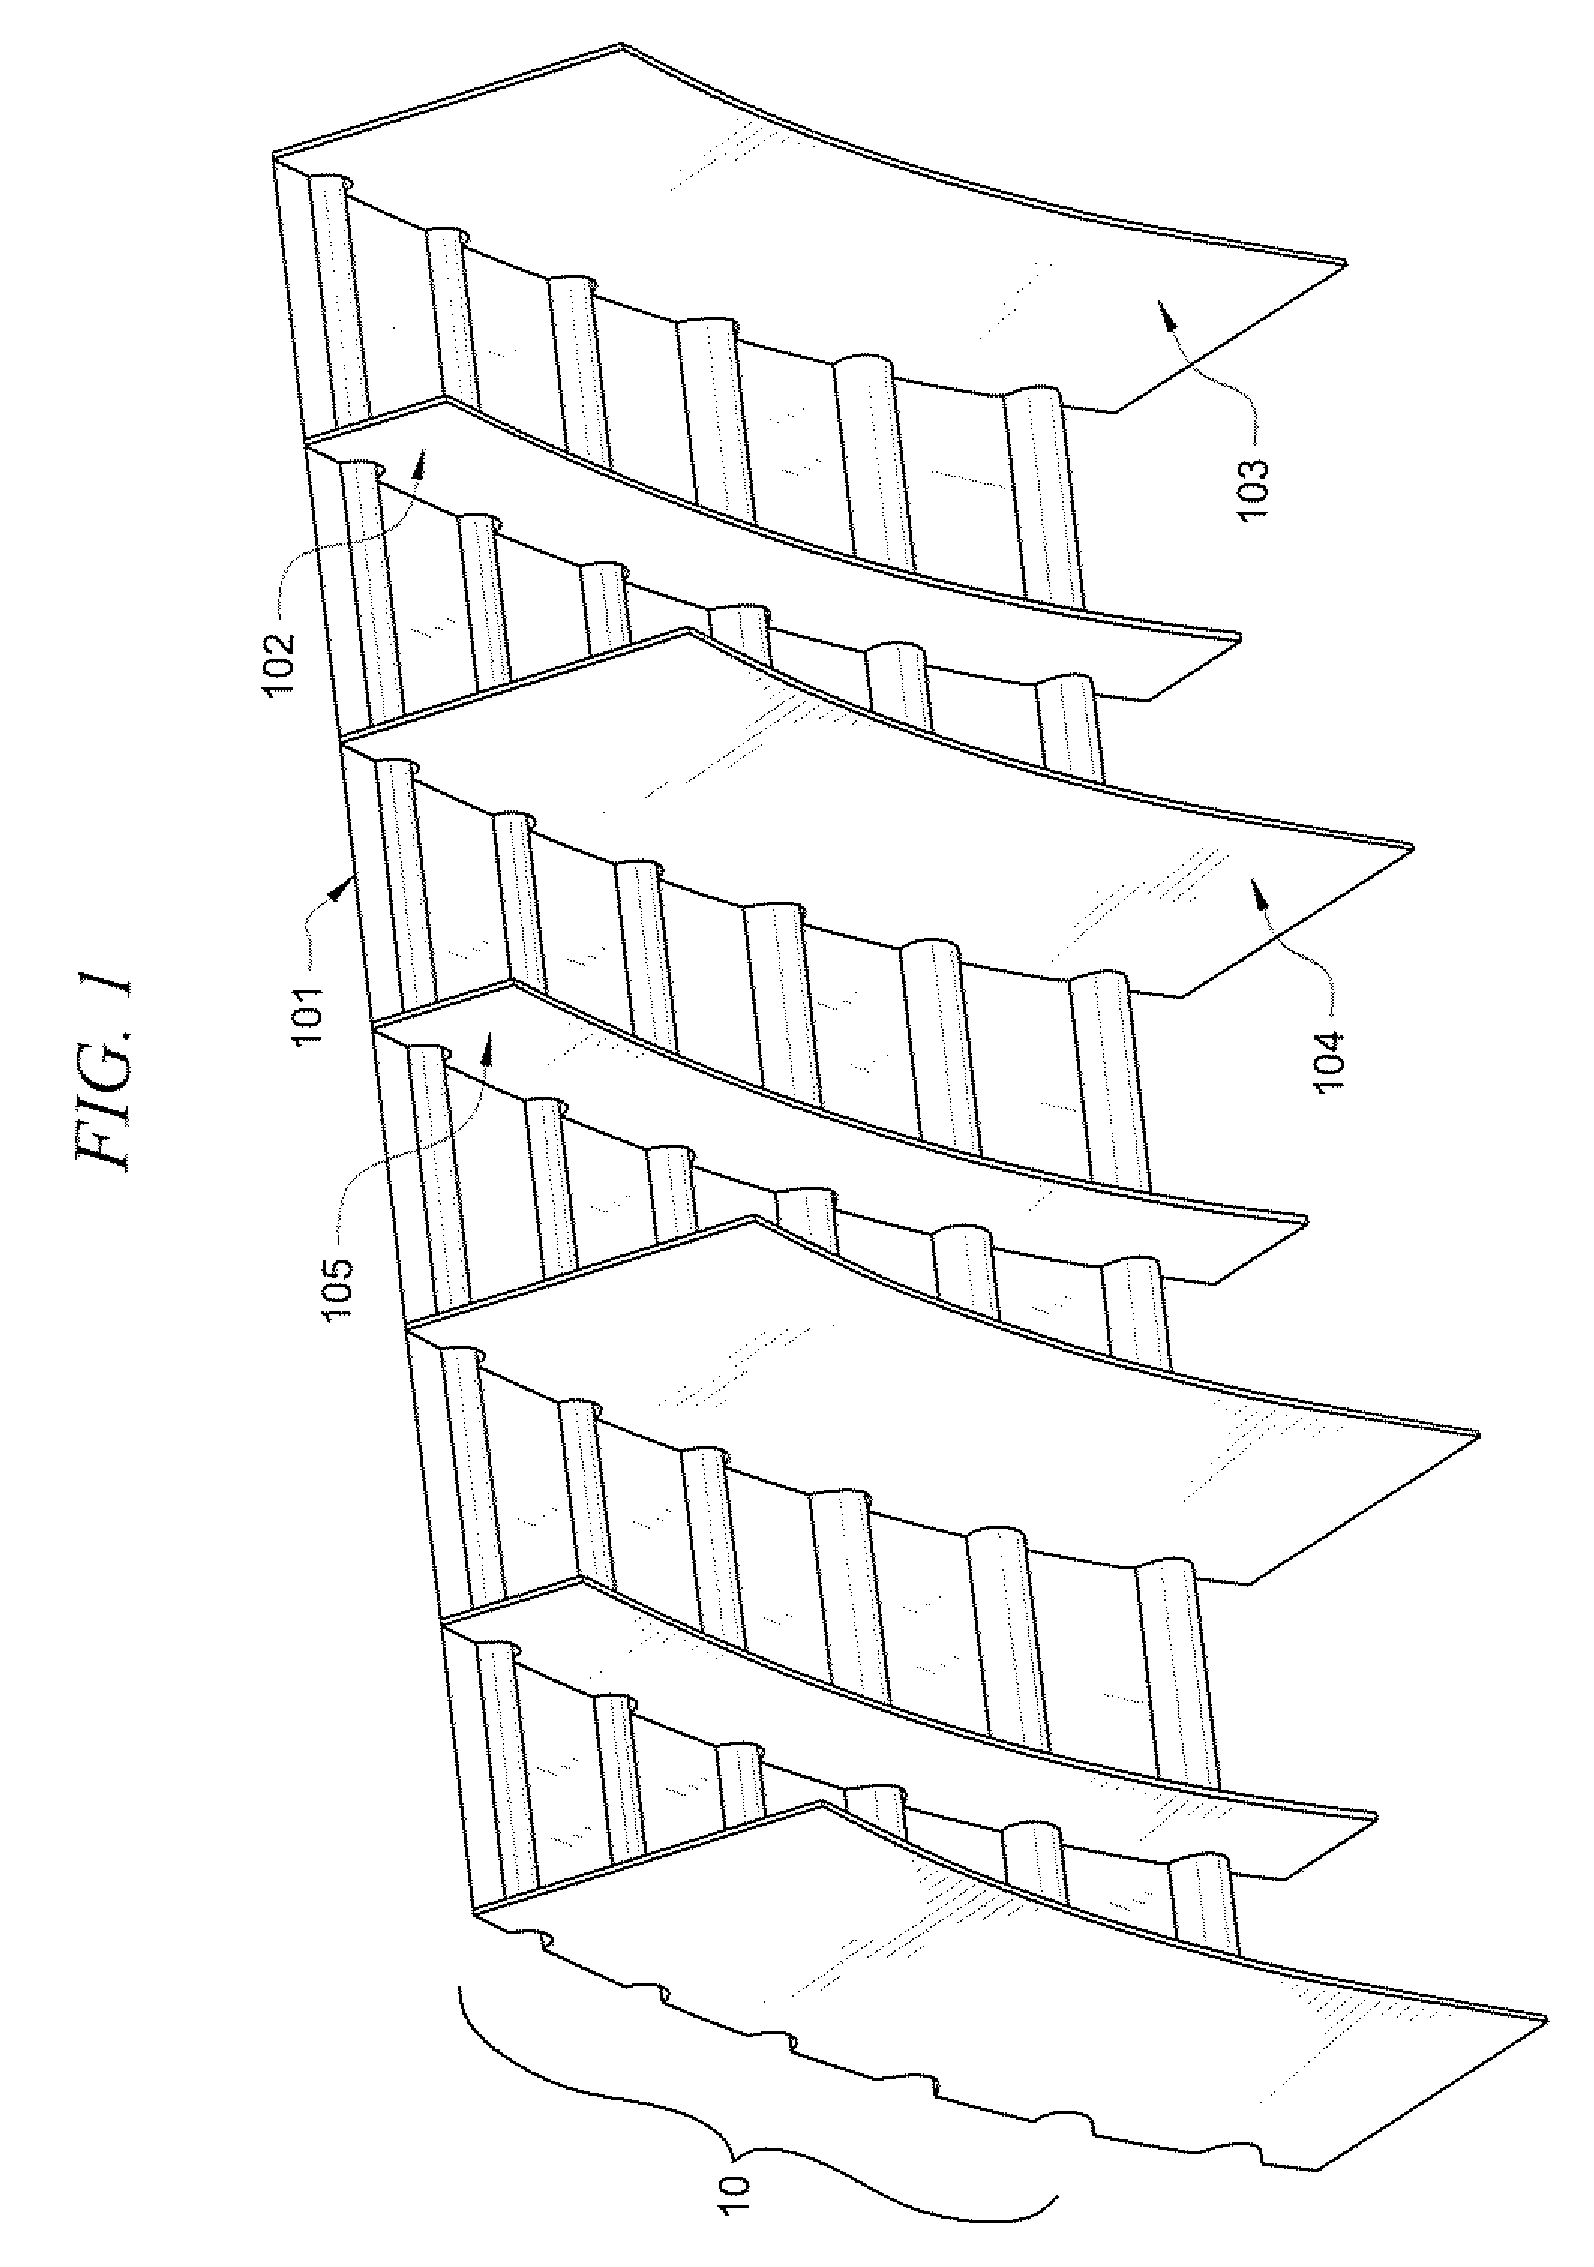 Coefficient of thermal expansion control structure